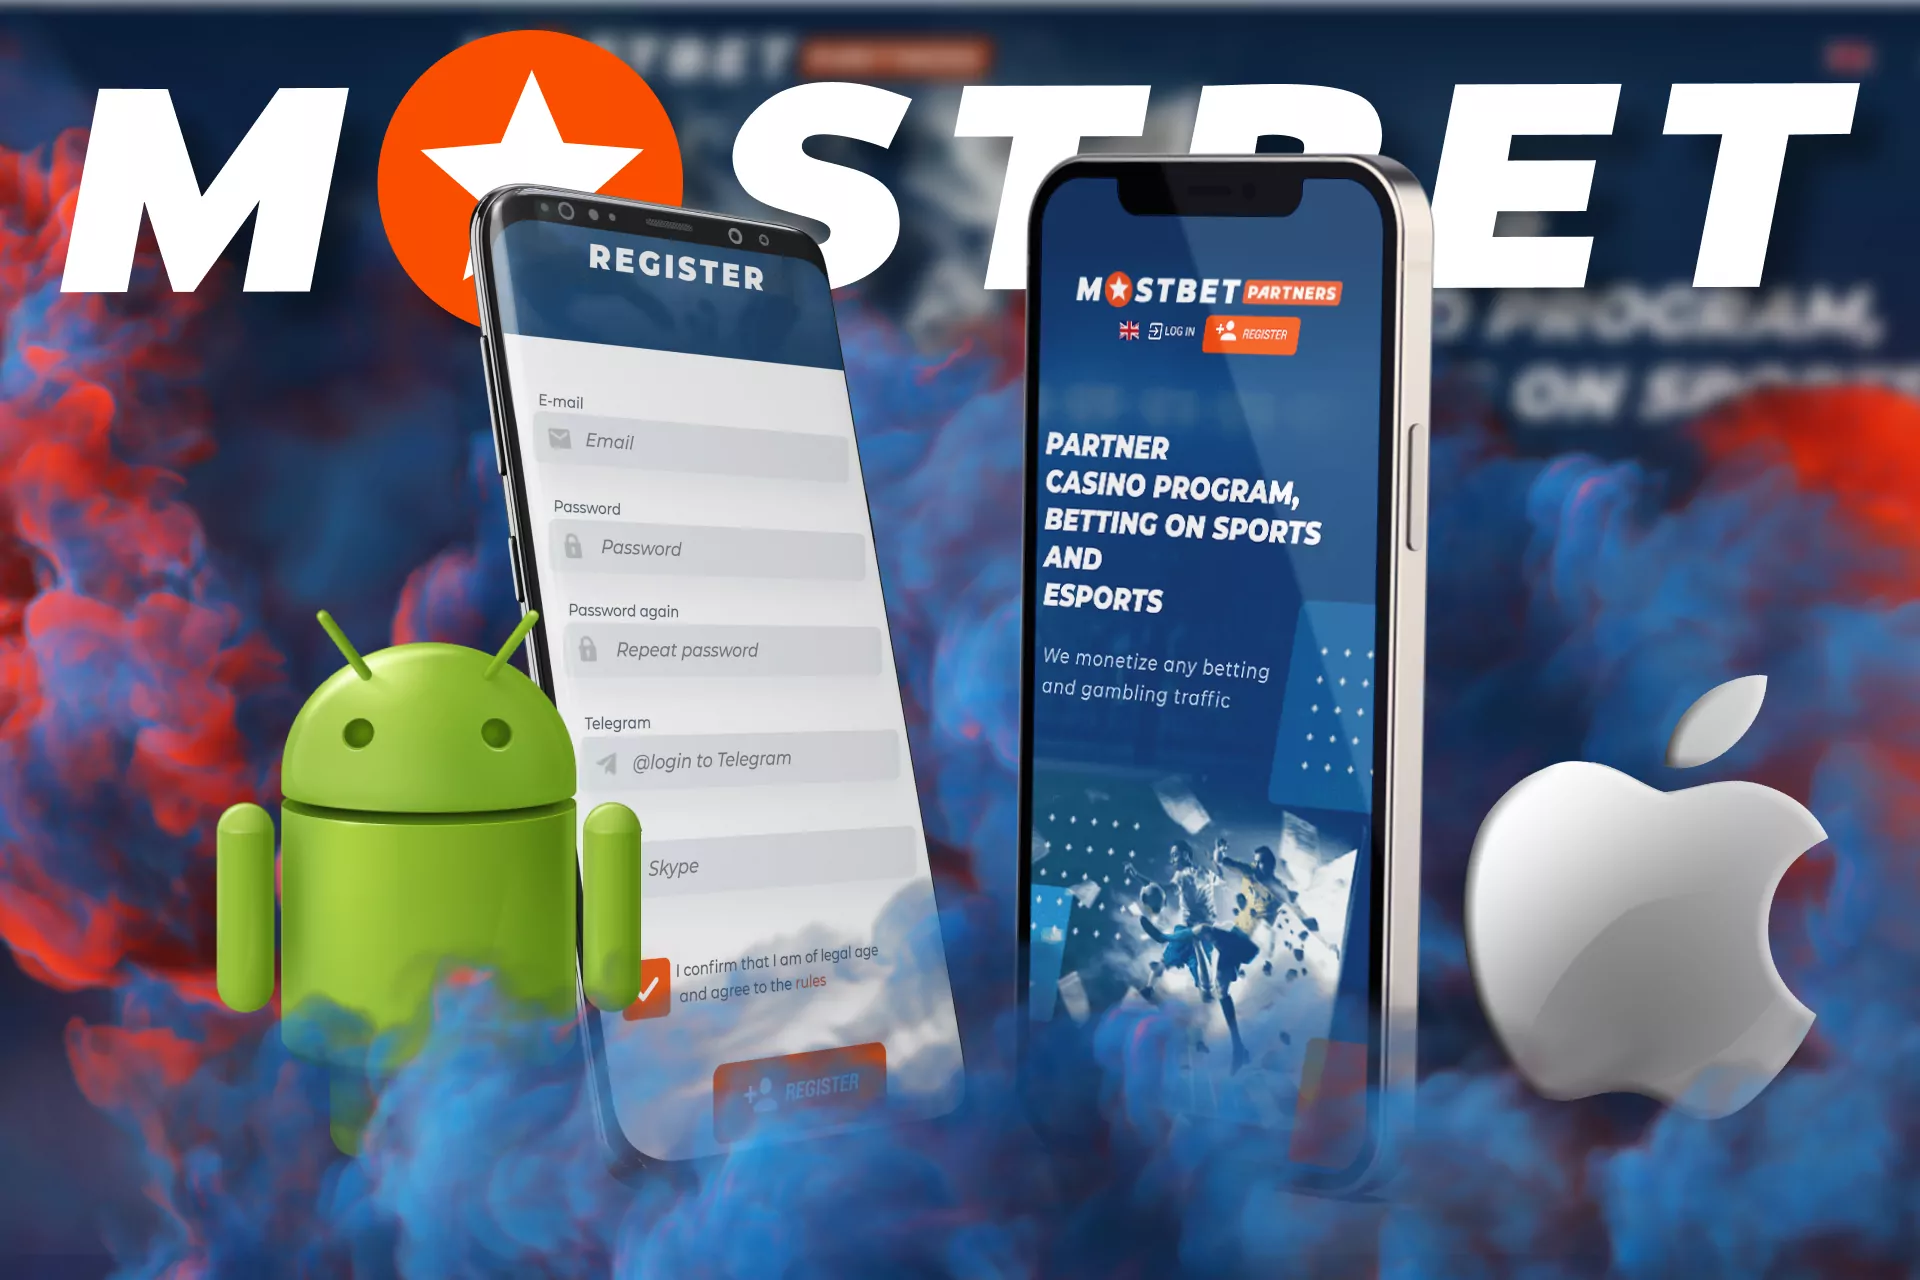 In a convenient affiliate program from Mostbet you can use the mobile application for Android and iOS.